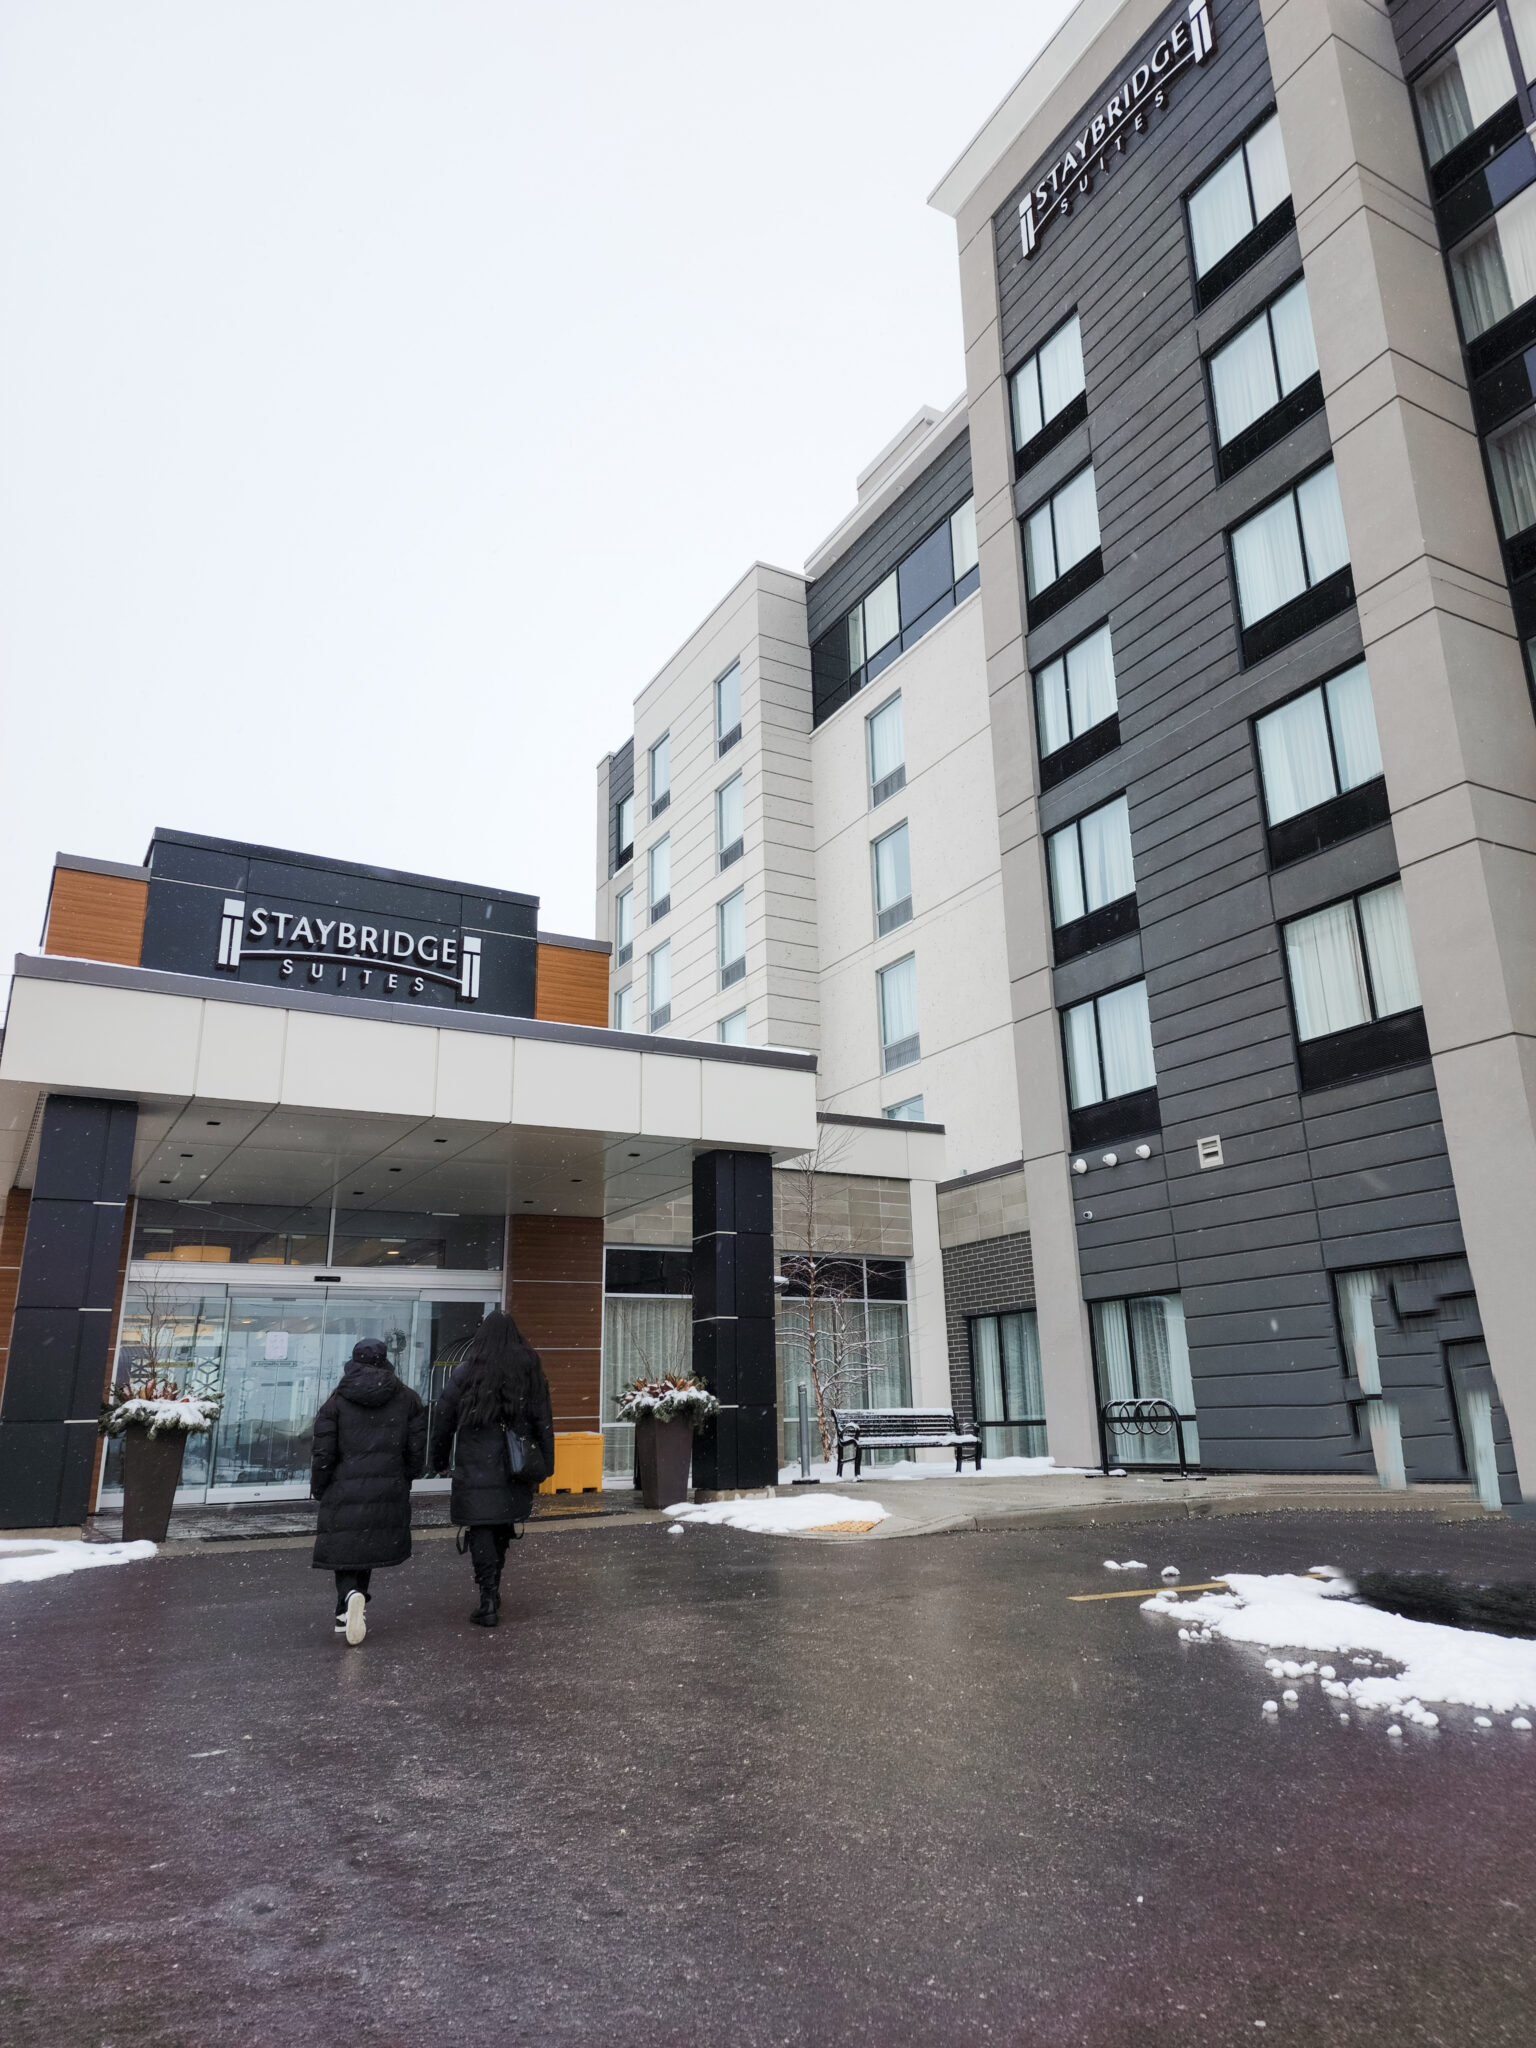 Two girls walk towards the Staybridge Suites in Waterloo-St. Jacobs. This article covers how to plan your next ultimate staycation at Staybridge Suites in Waterloo-St. Jacobs.